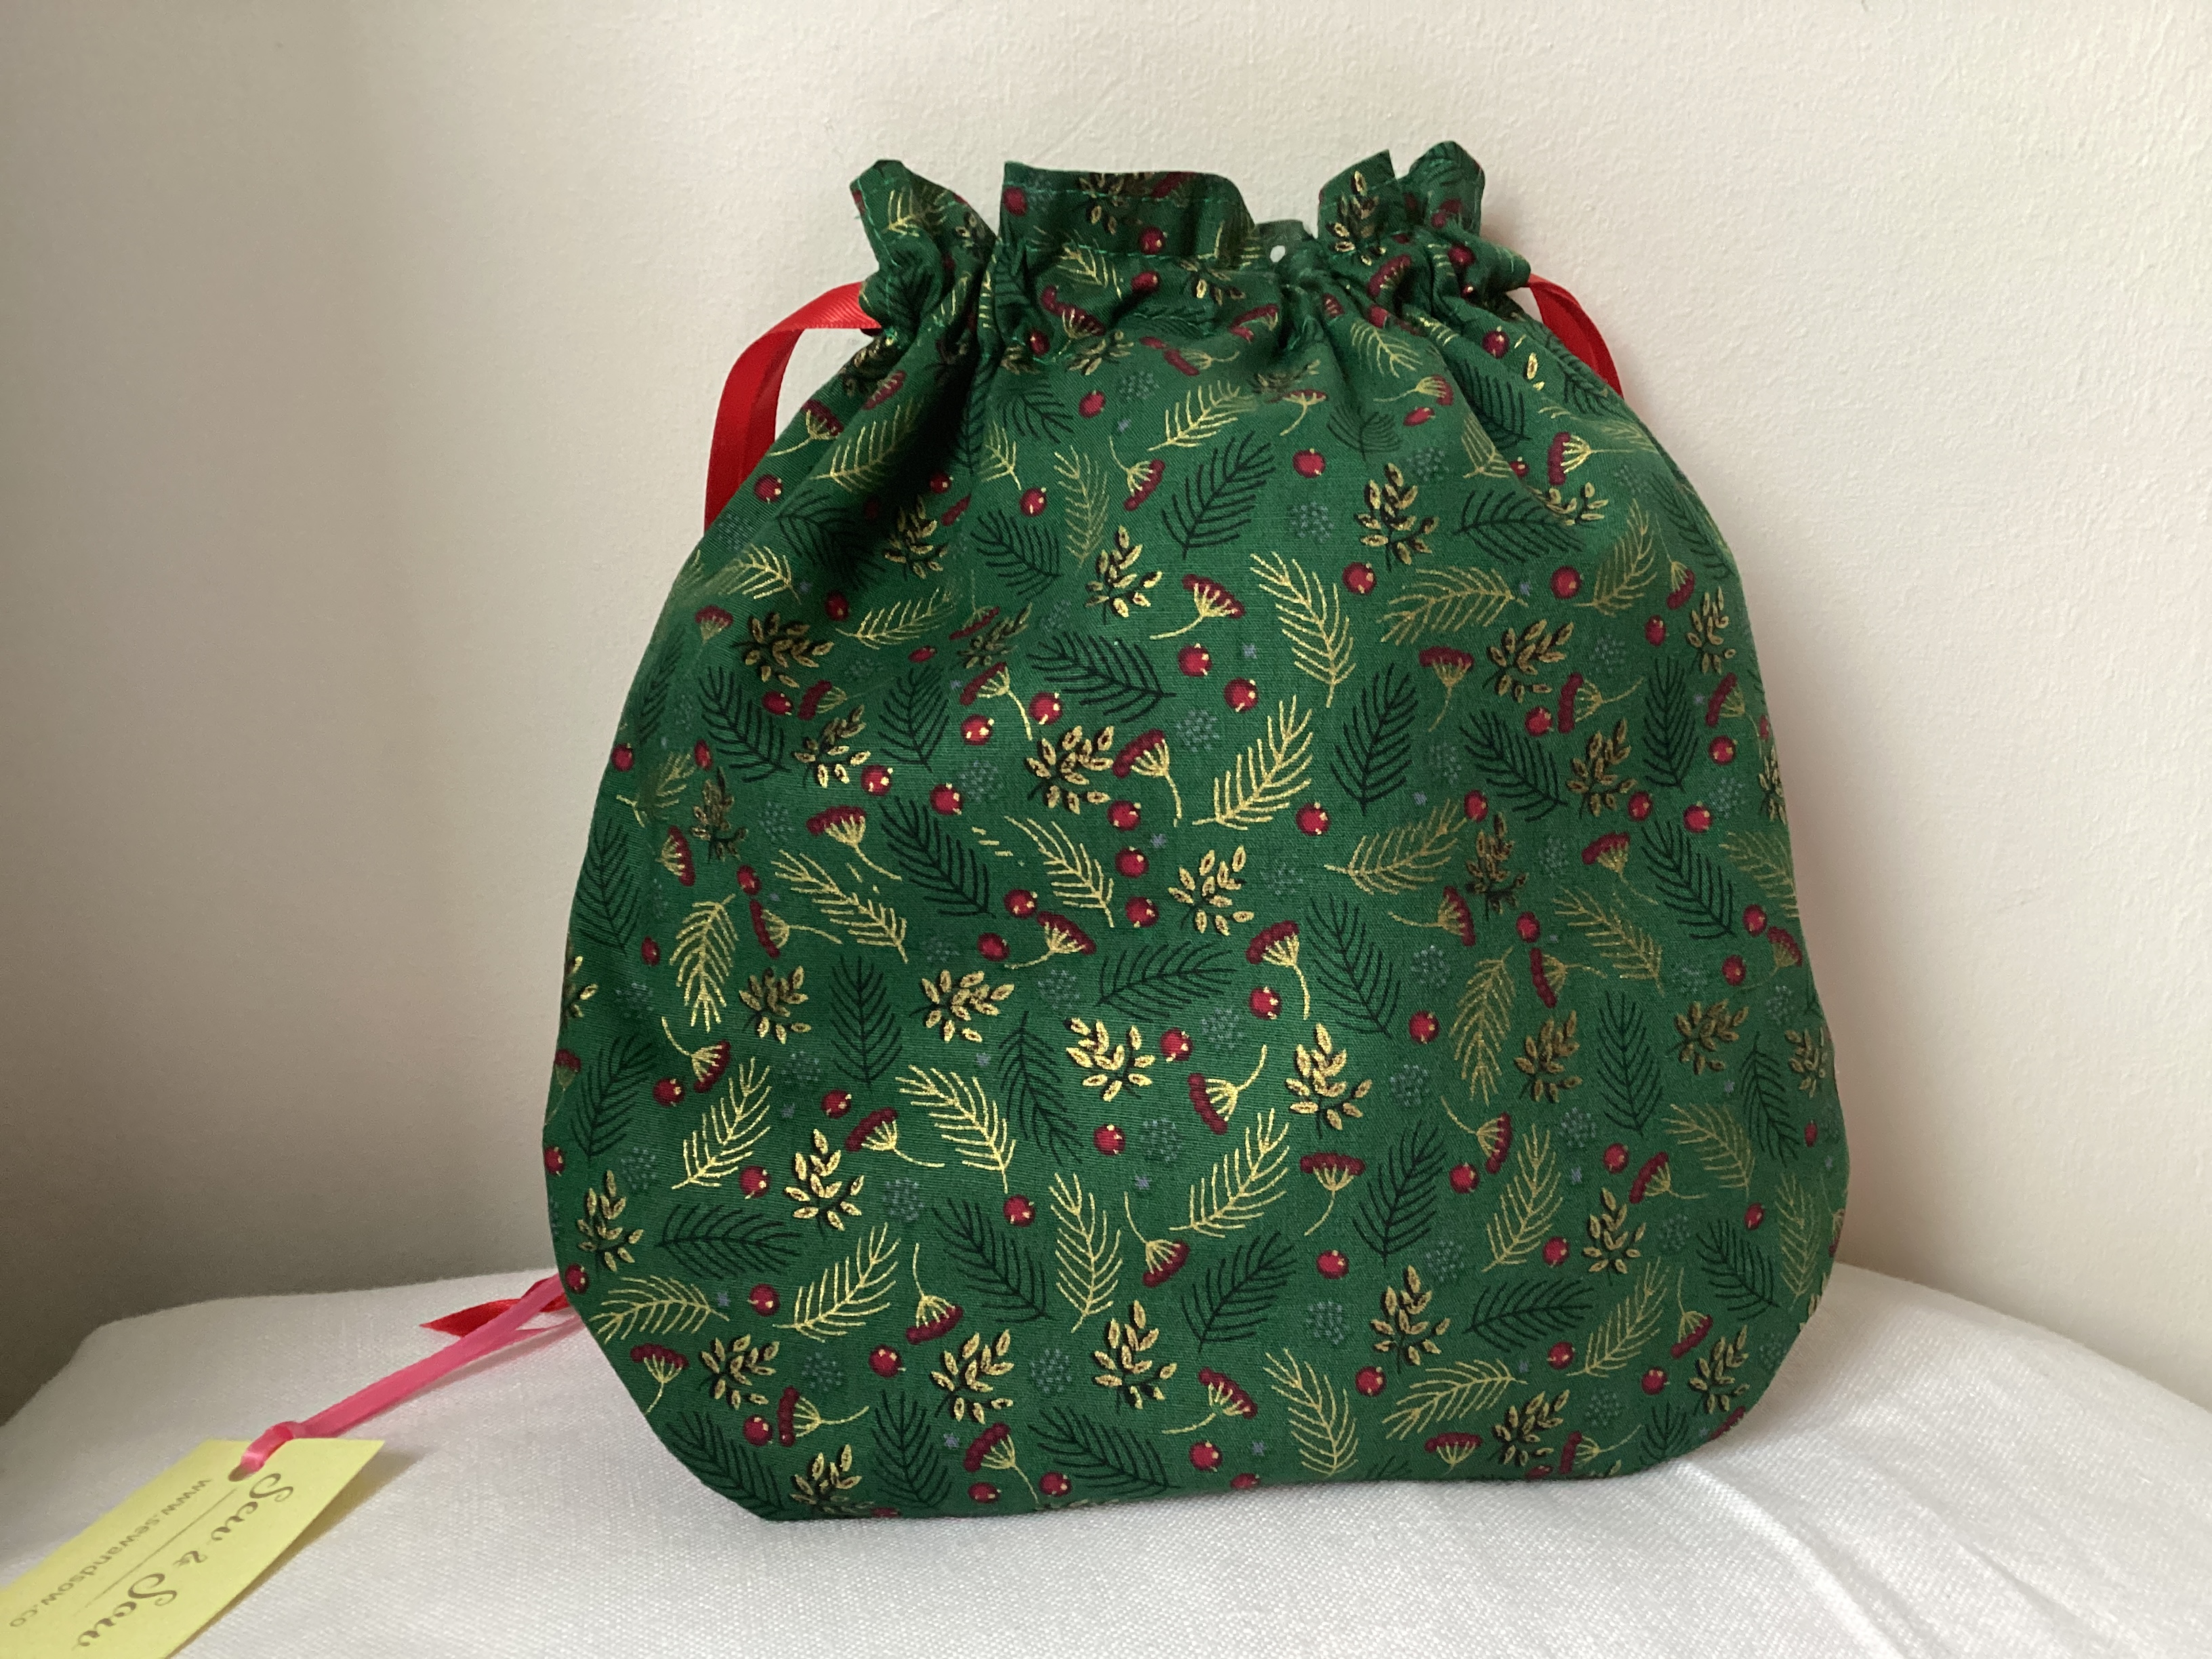 Christmas Gift Bag - green with leaves and berries